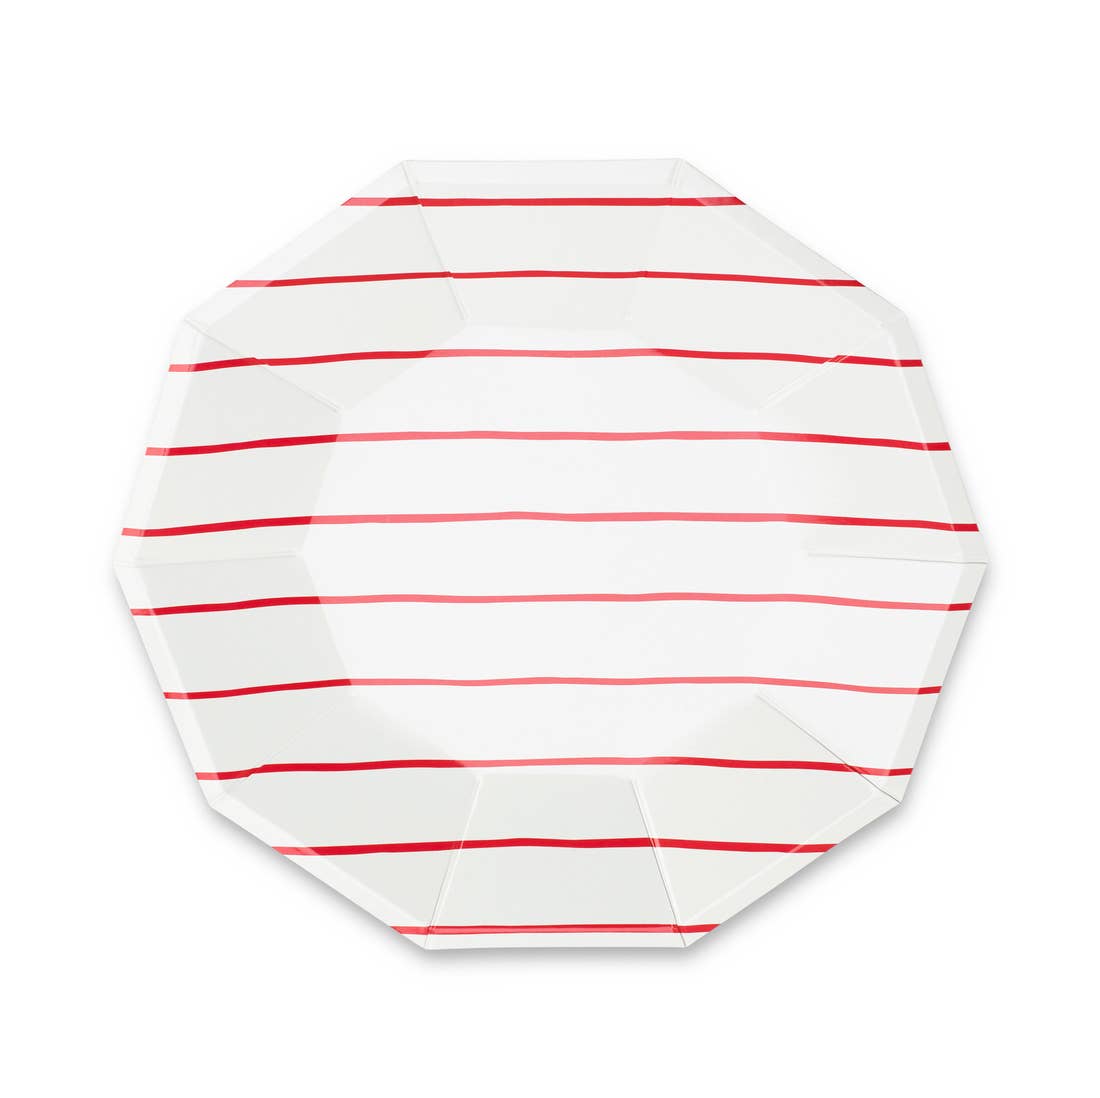 Frenchie Striped Large Plates in Candy Apple